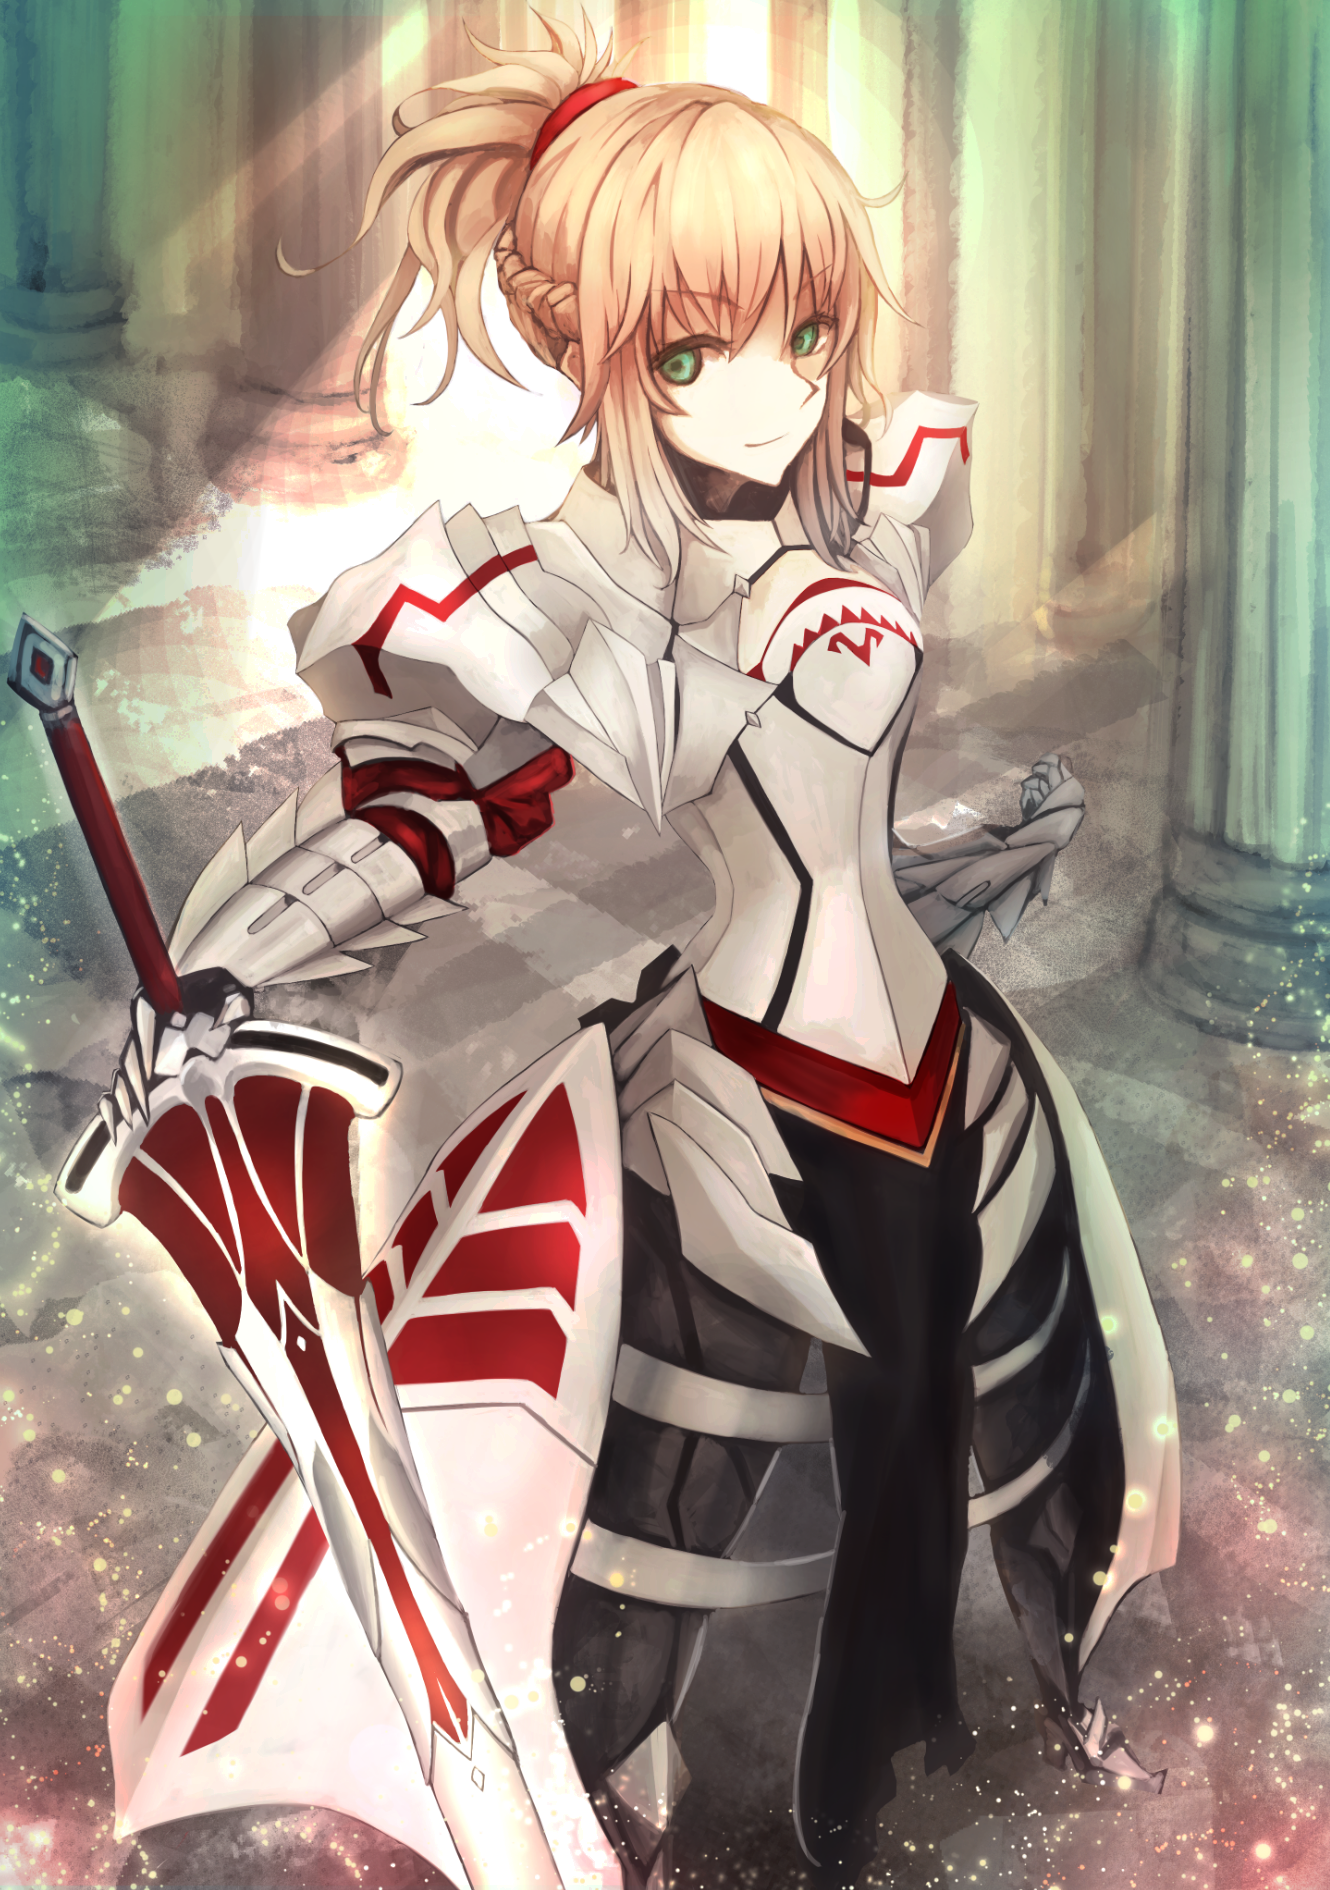 Anime Girls Fate Grand Order Short Hair Blonde Armor Sword Green Eyes Saber Of Red Fate Apocrypha Mo 1330x1890